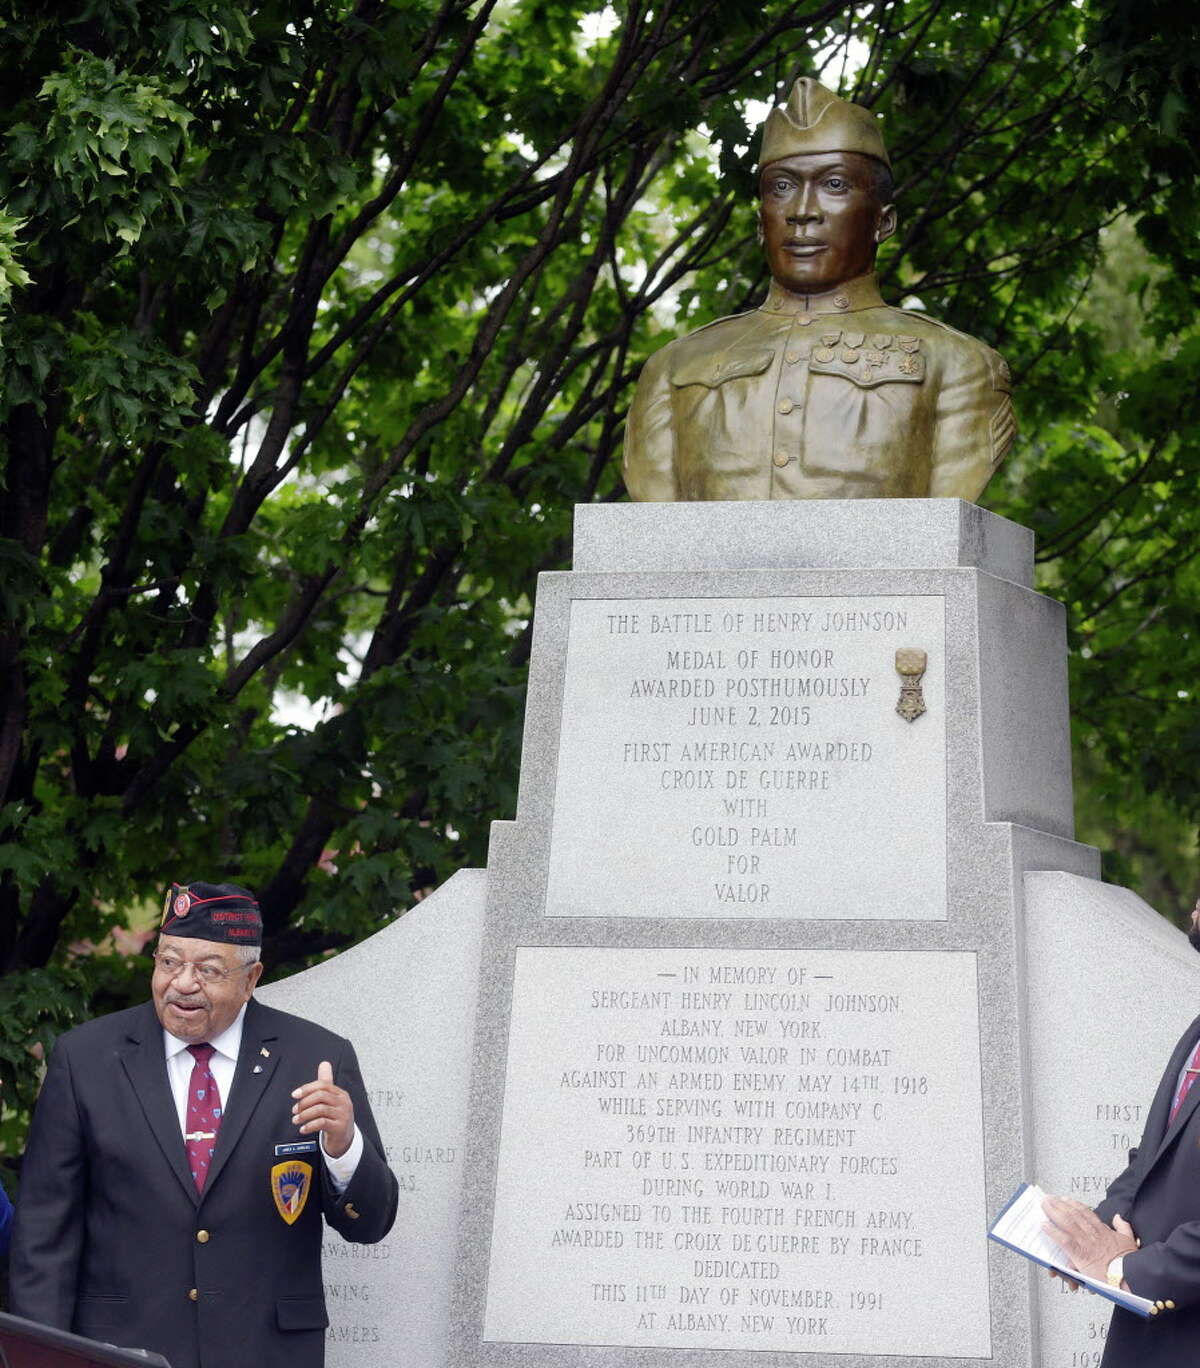 James Dandles, the district president of the 369th Veterans Association (Henry Johnson?•s Regiment) stands near the Henry Johnson statue at an event to mark the first annual Henry Johnson Day on Monday, June 5, 2017, in Albany, N.Y. A replica Medal of Honor was added to the Henry Johnson Statue, which was unveiled on Monday. Dandles was also awarded the first Henry Johnson Award for Distinguished Community Service. (Paul Buckowski / Times Union)